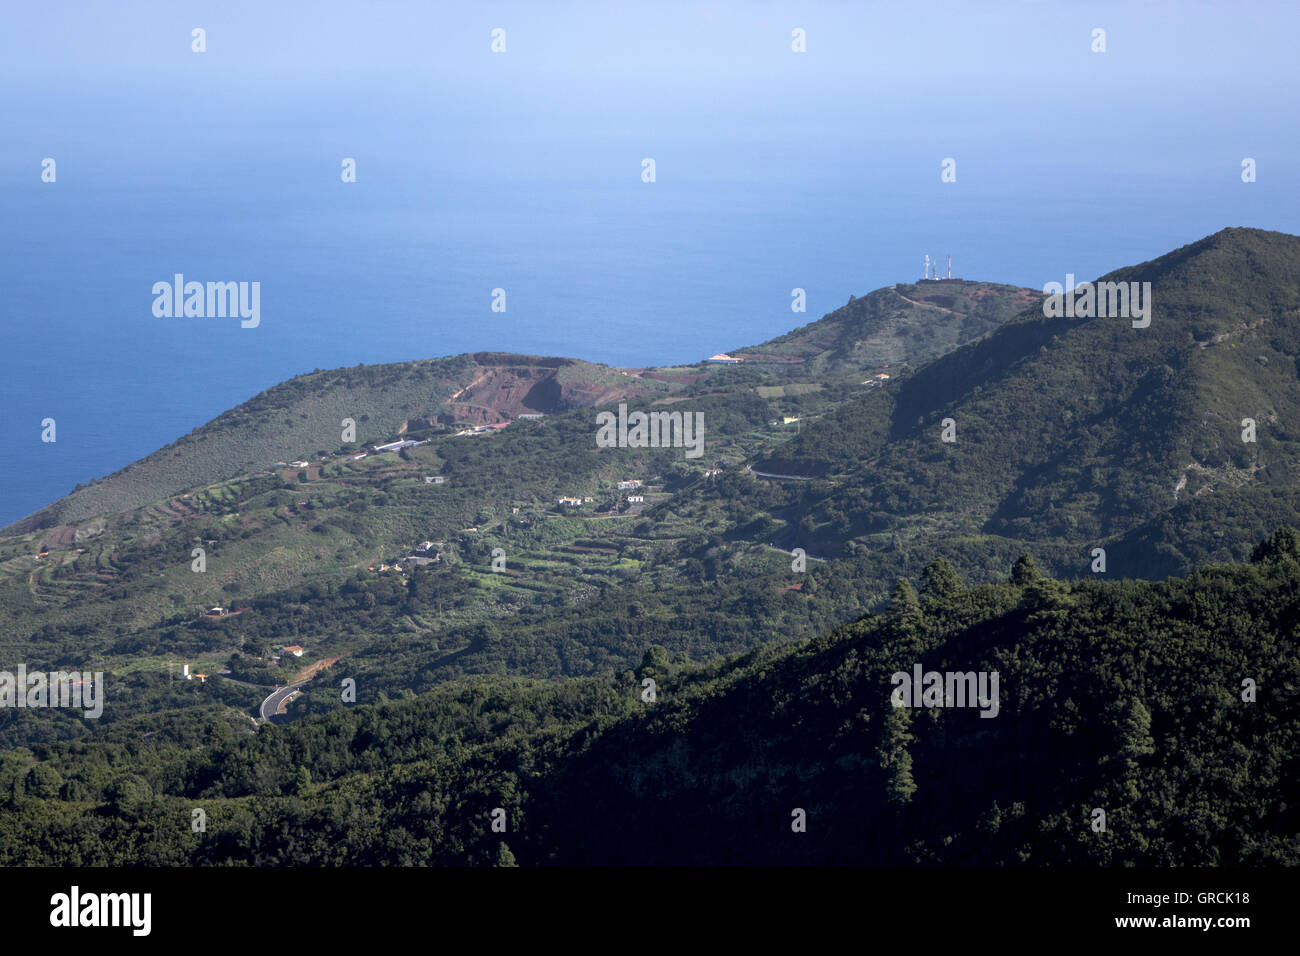 View From A Viewpoint Over Wooded Hills Down To The Atlantic Ocean Nd Blue Sky. Northwestern Part Of The Canary Island La Palma Stock Photo